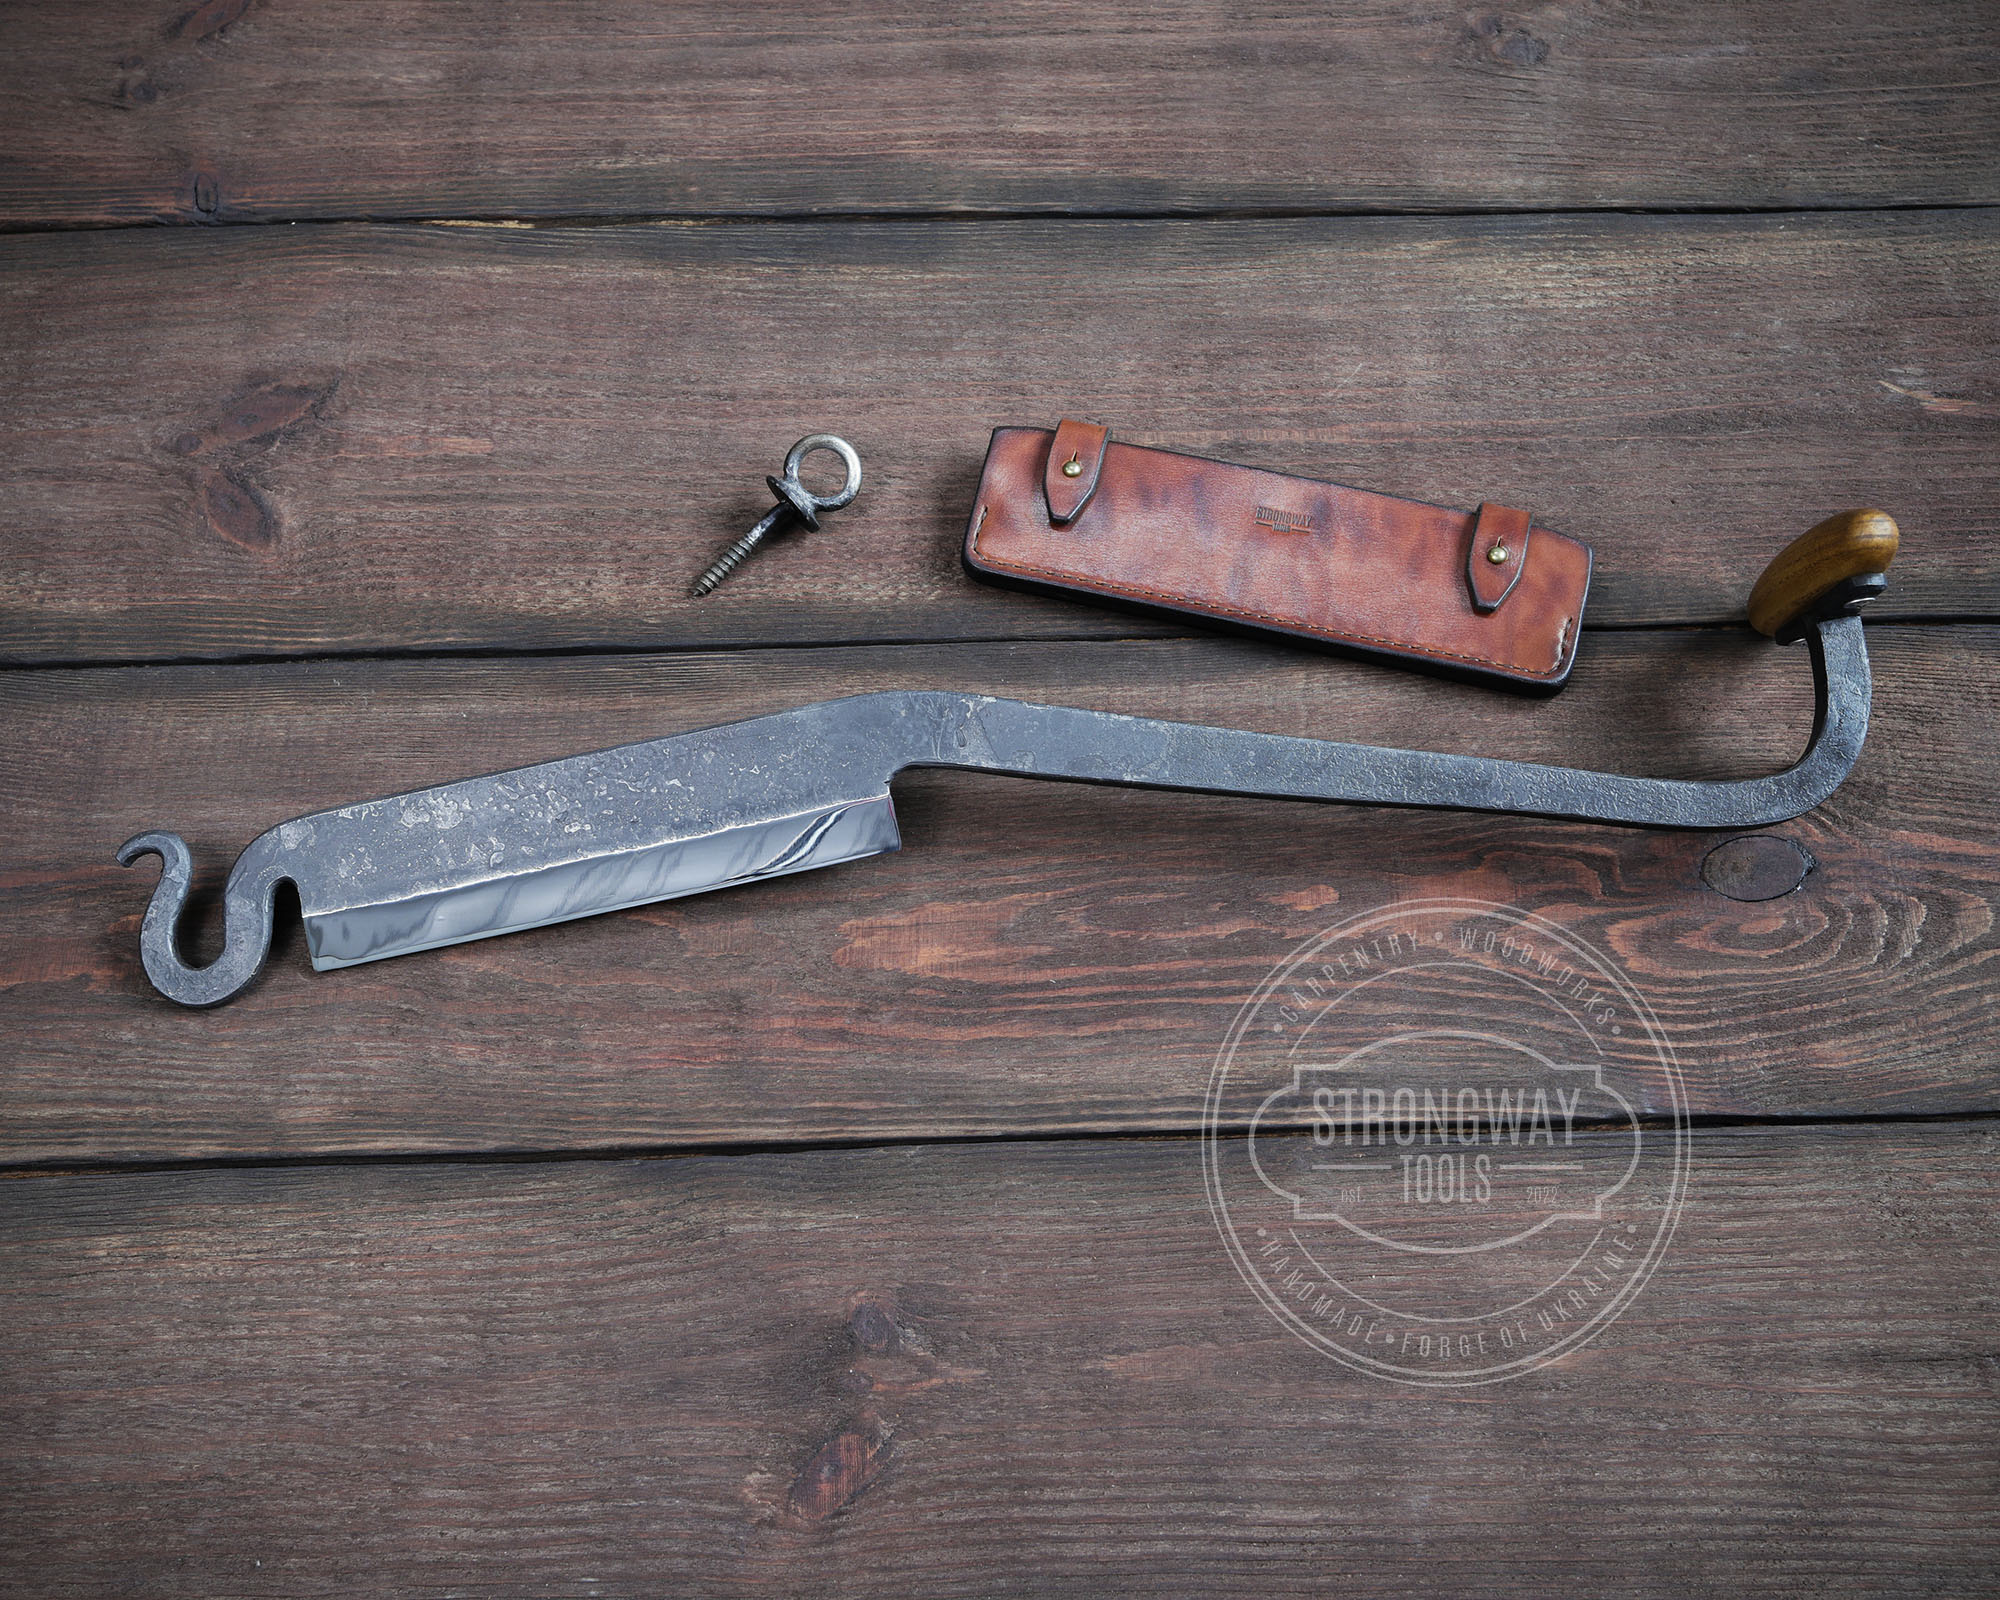 Hand Forged Stock Knife. Hand Forged Cloggers Knife. Stock Knife